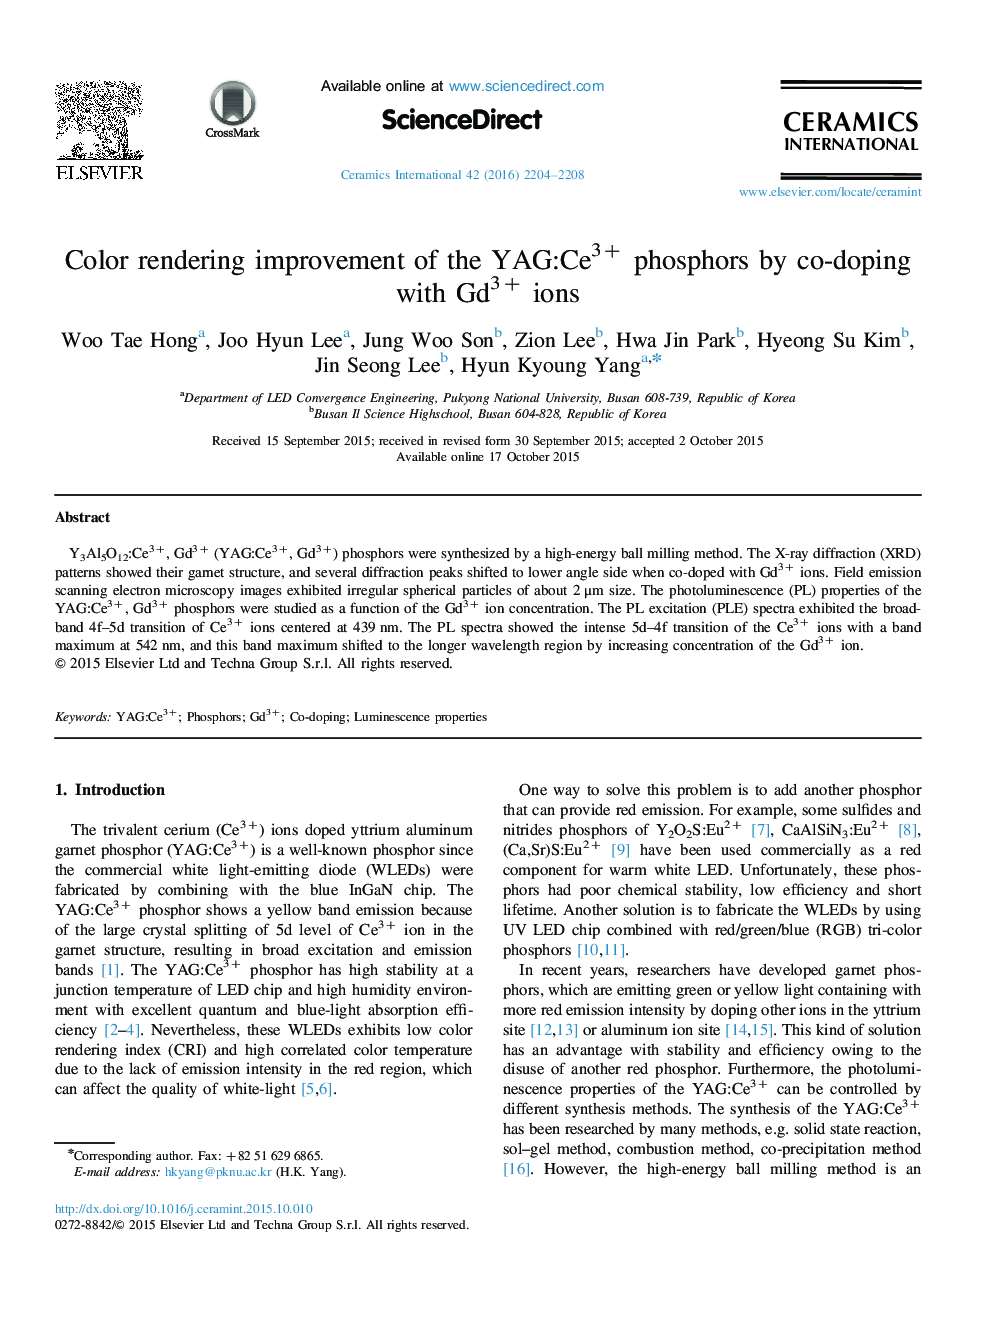 Color rendering improvement of the YAG:Ce3+ phosphors by co-doping with Gd3+ ions